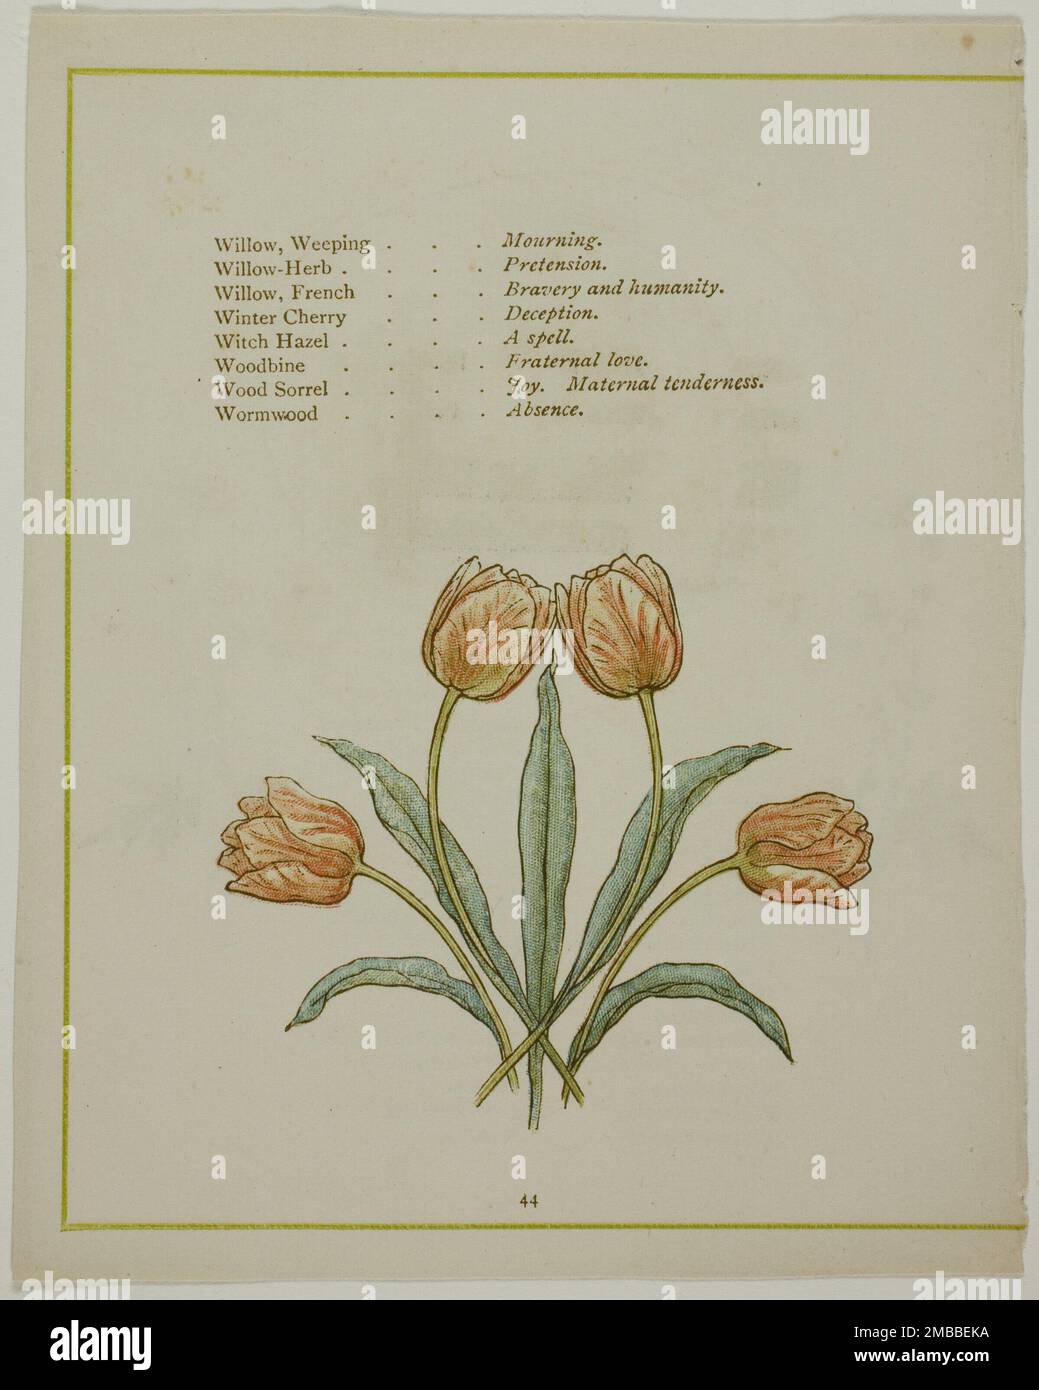 Decorative Illustration, from The Illuminated Language of Flowers, published 1884. Probably by Edmund Evans after Kate Greenaway. Stock Photo